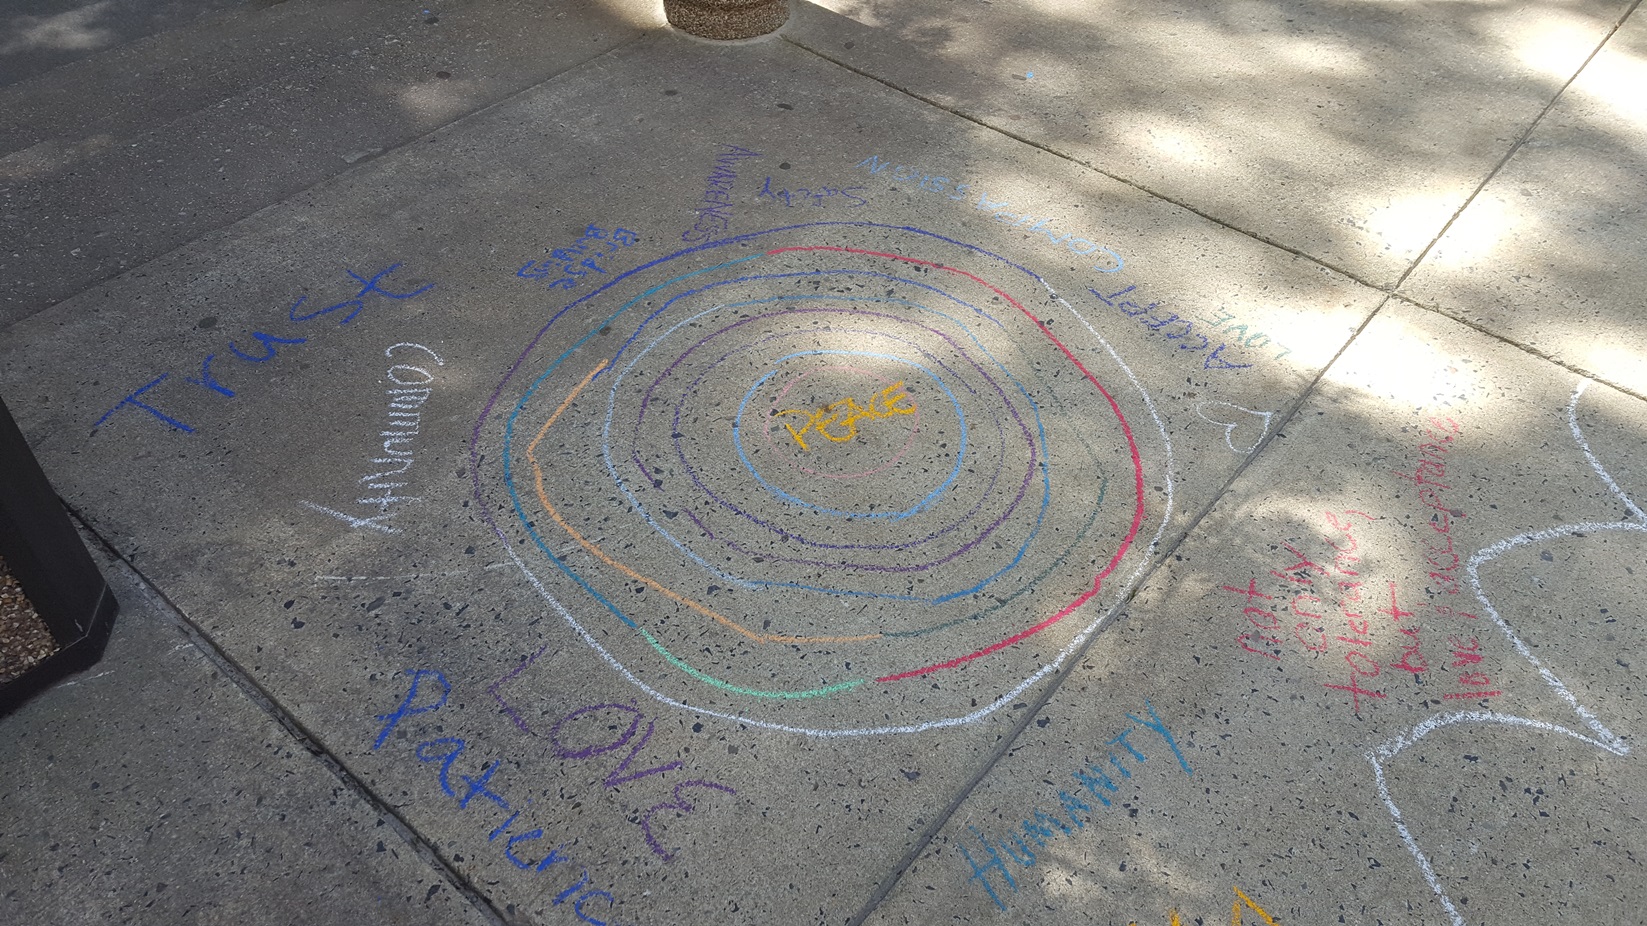 Sidewalk chalk art showing colorful circles around the word 